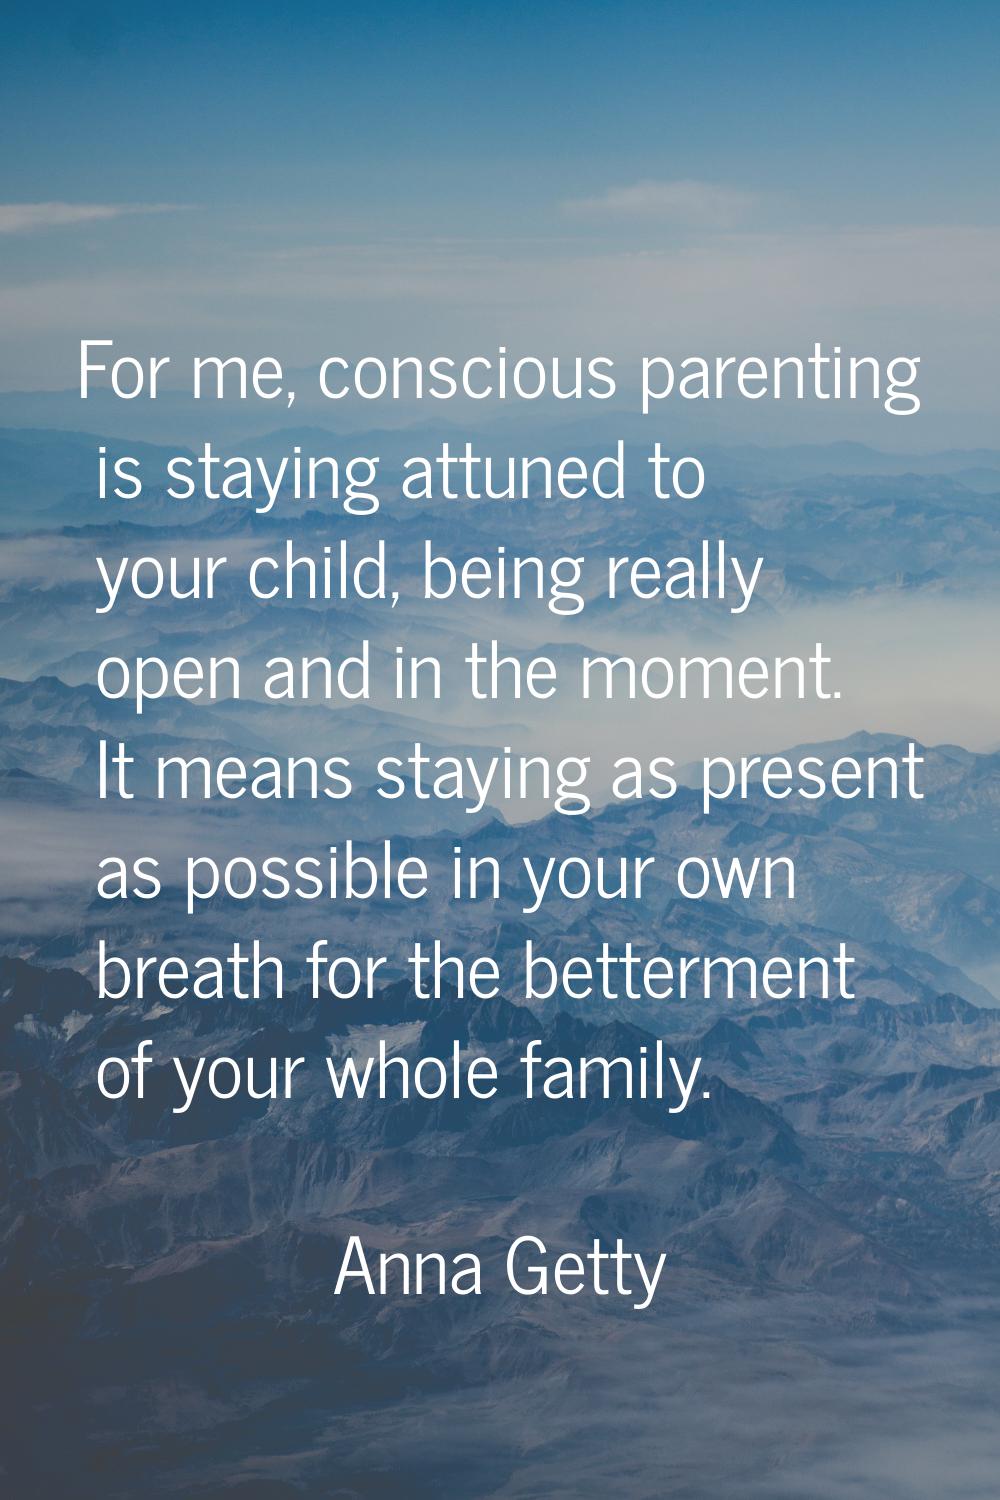 For me, conscious parenting is staying attuned to your child, being really open and in the moment. 